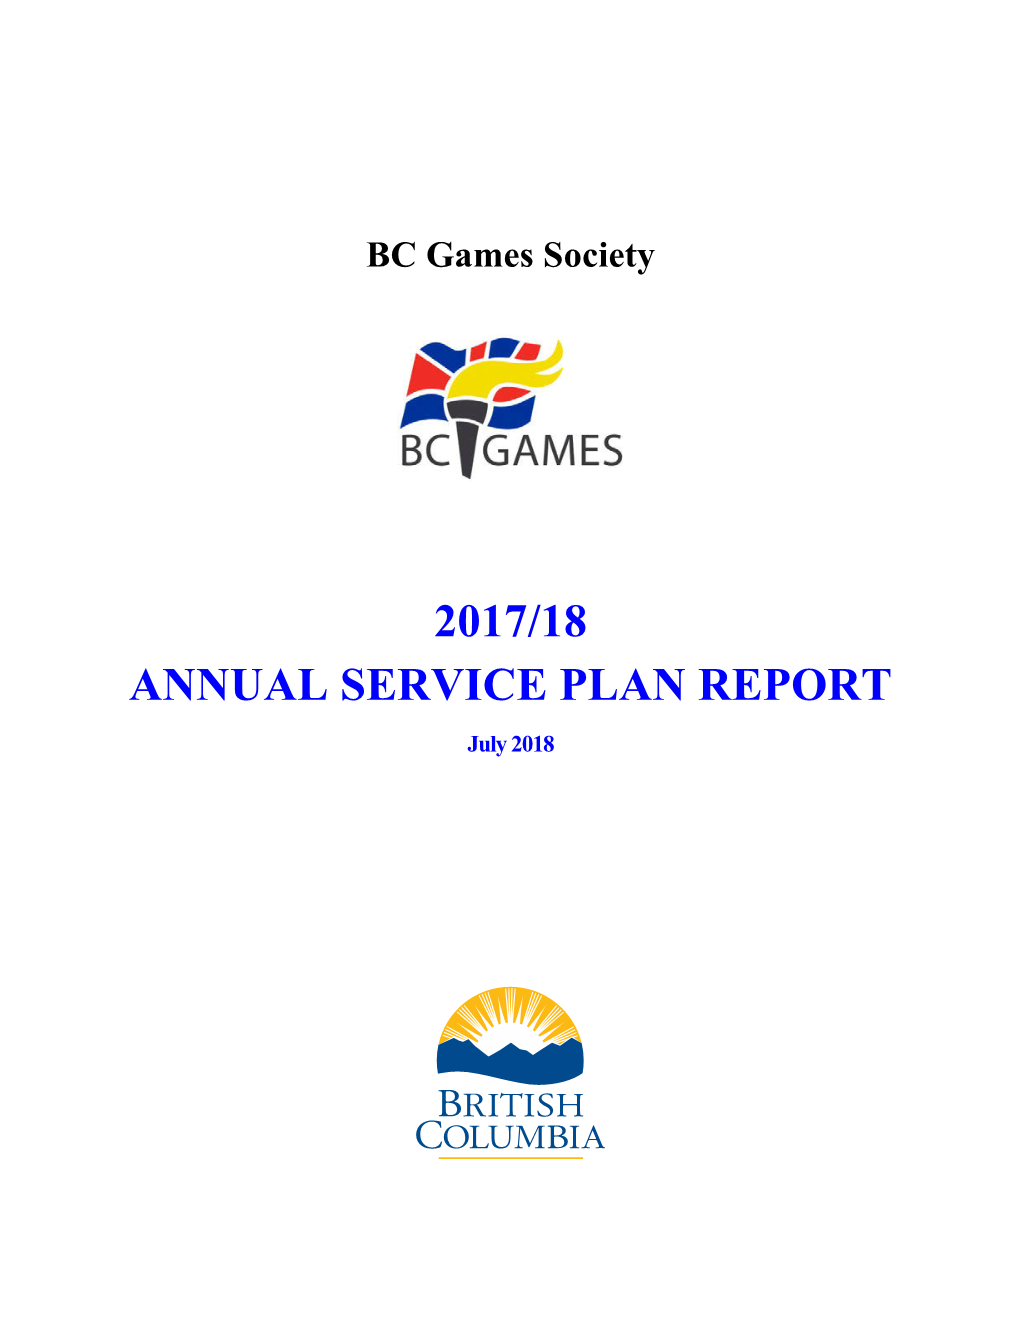 BC Games Society 2017/18 Annual Service Plan Report